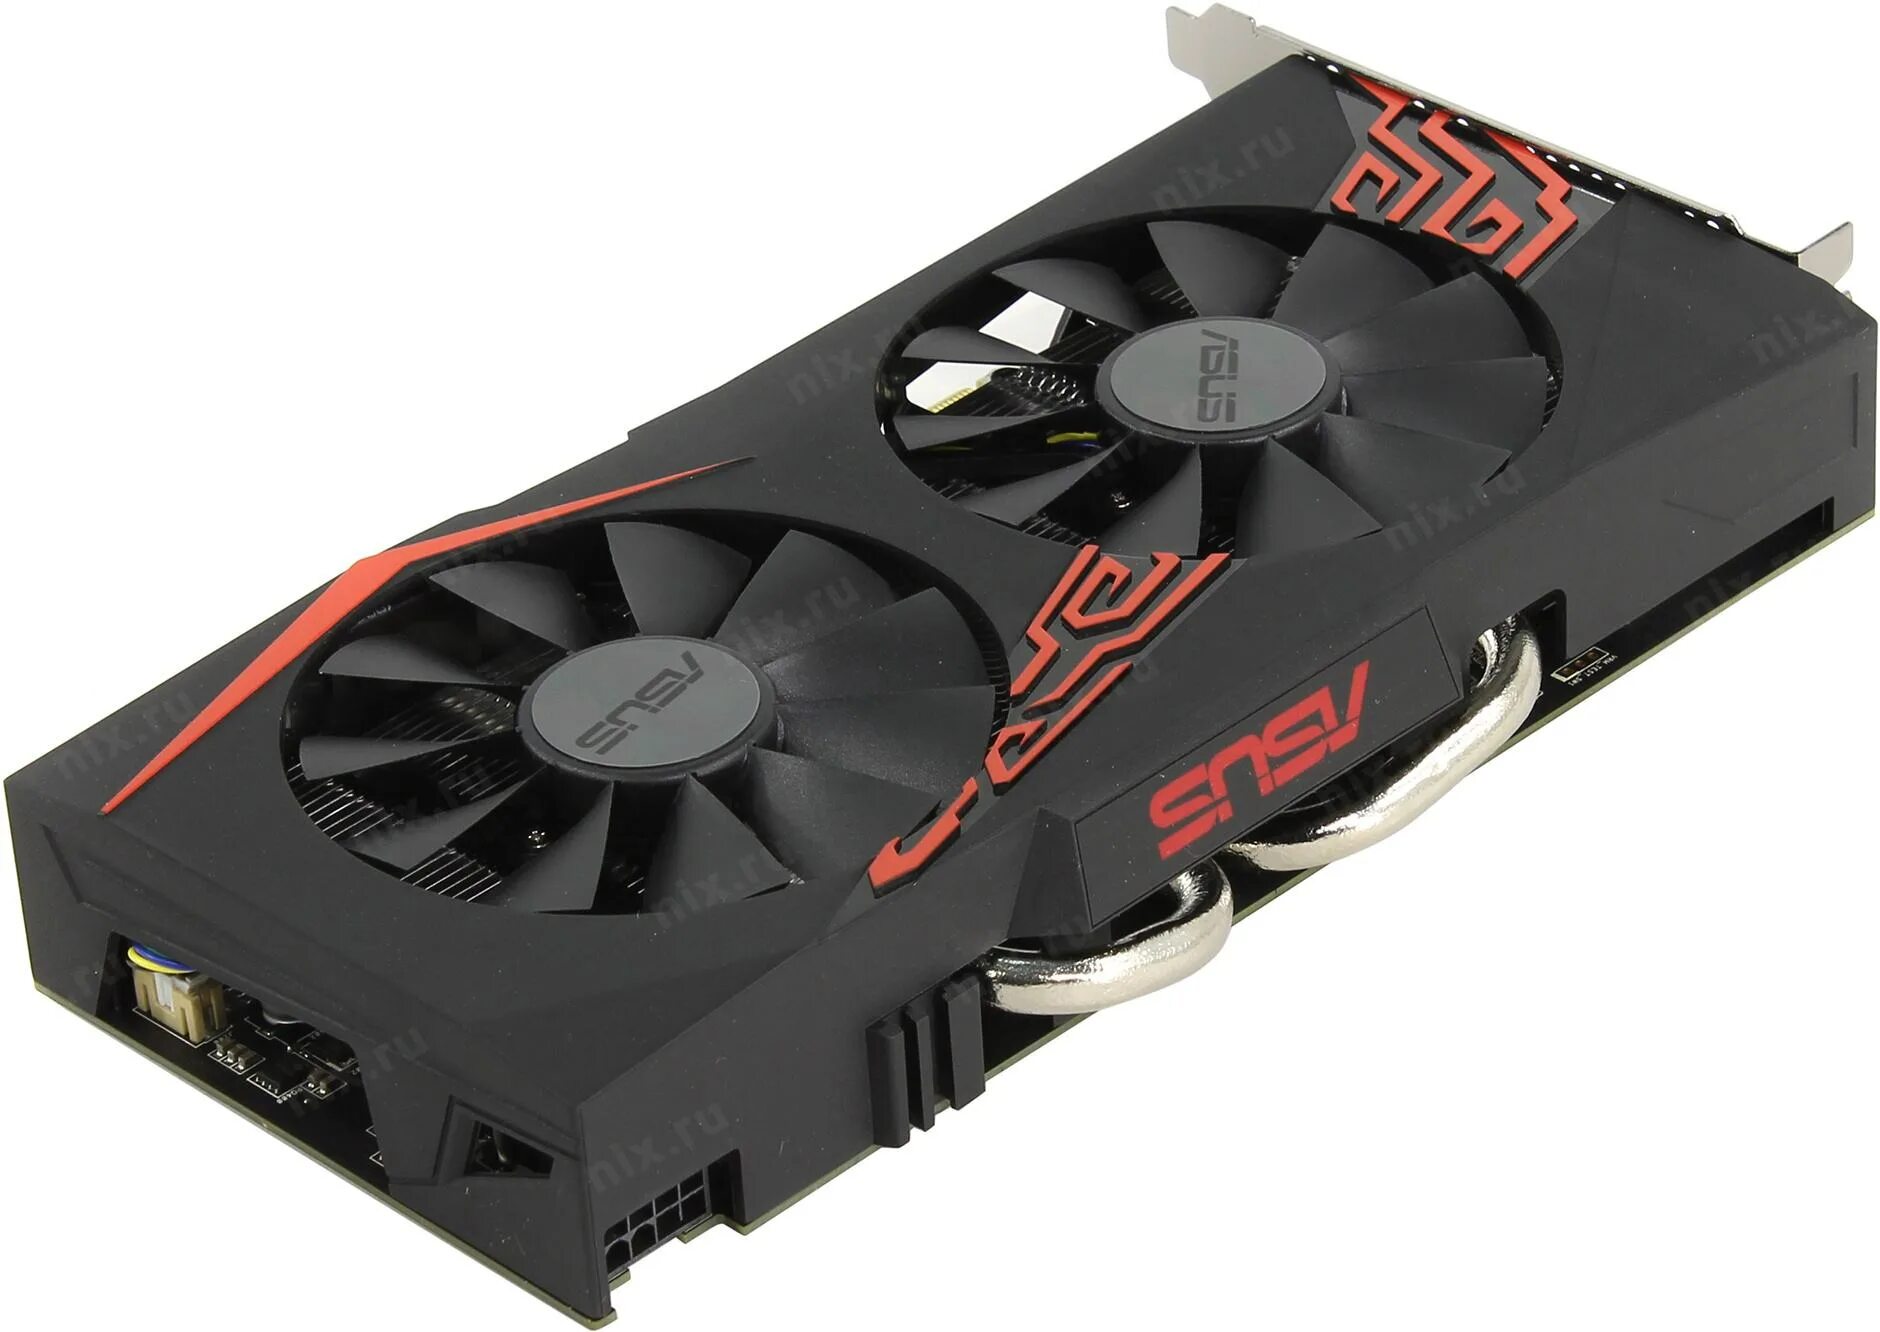 570 4g. RX 570 4gb Expedition. ASUS RX 570 4gb Expedition. Видеокарта RX 570 4gb. Видеокарта ASUS RX 570 4gb.